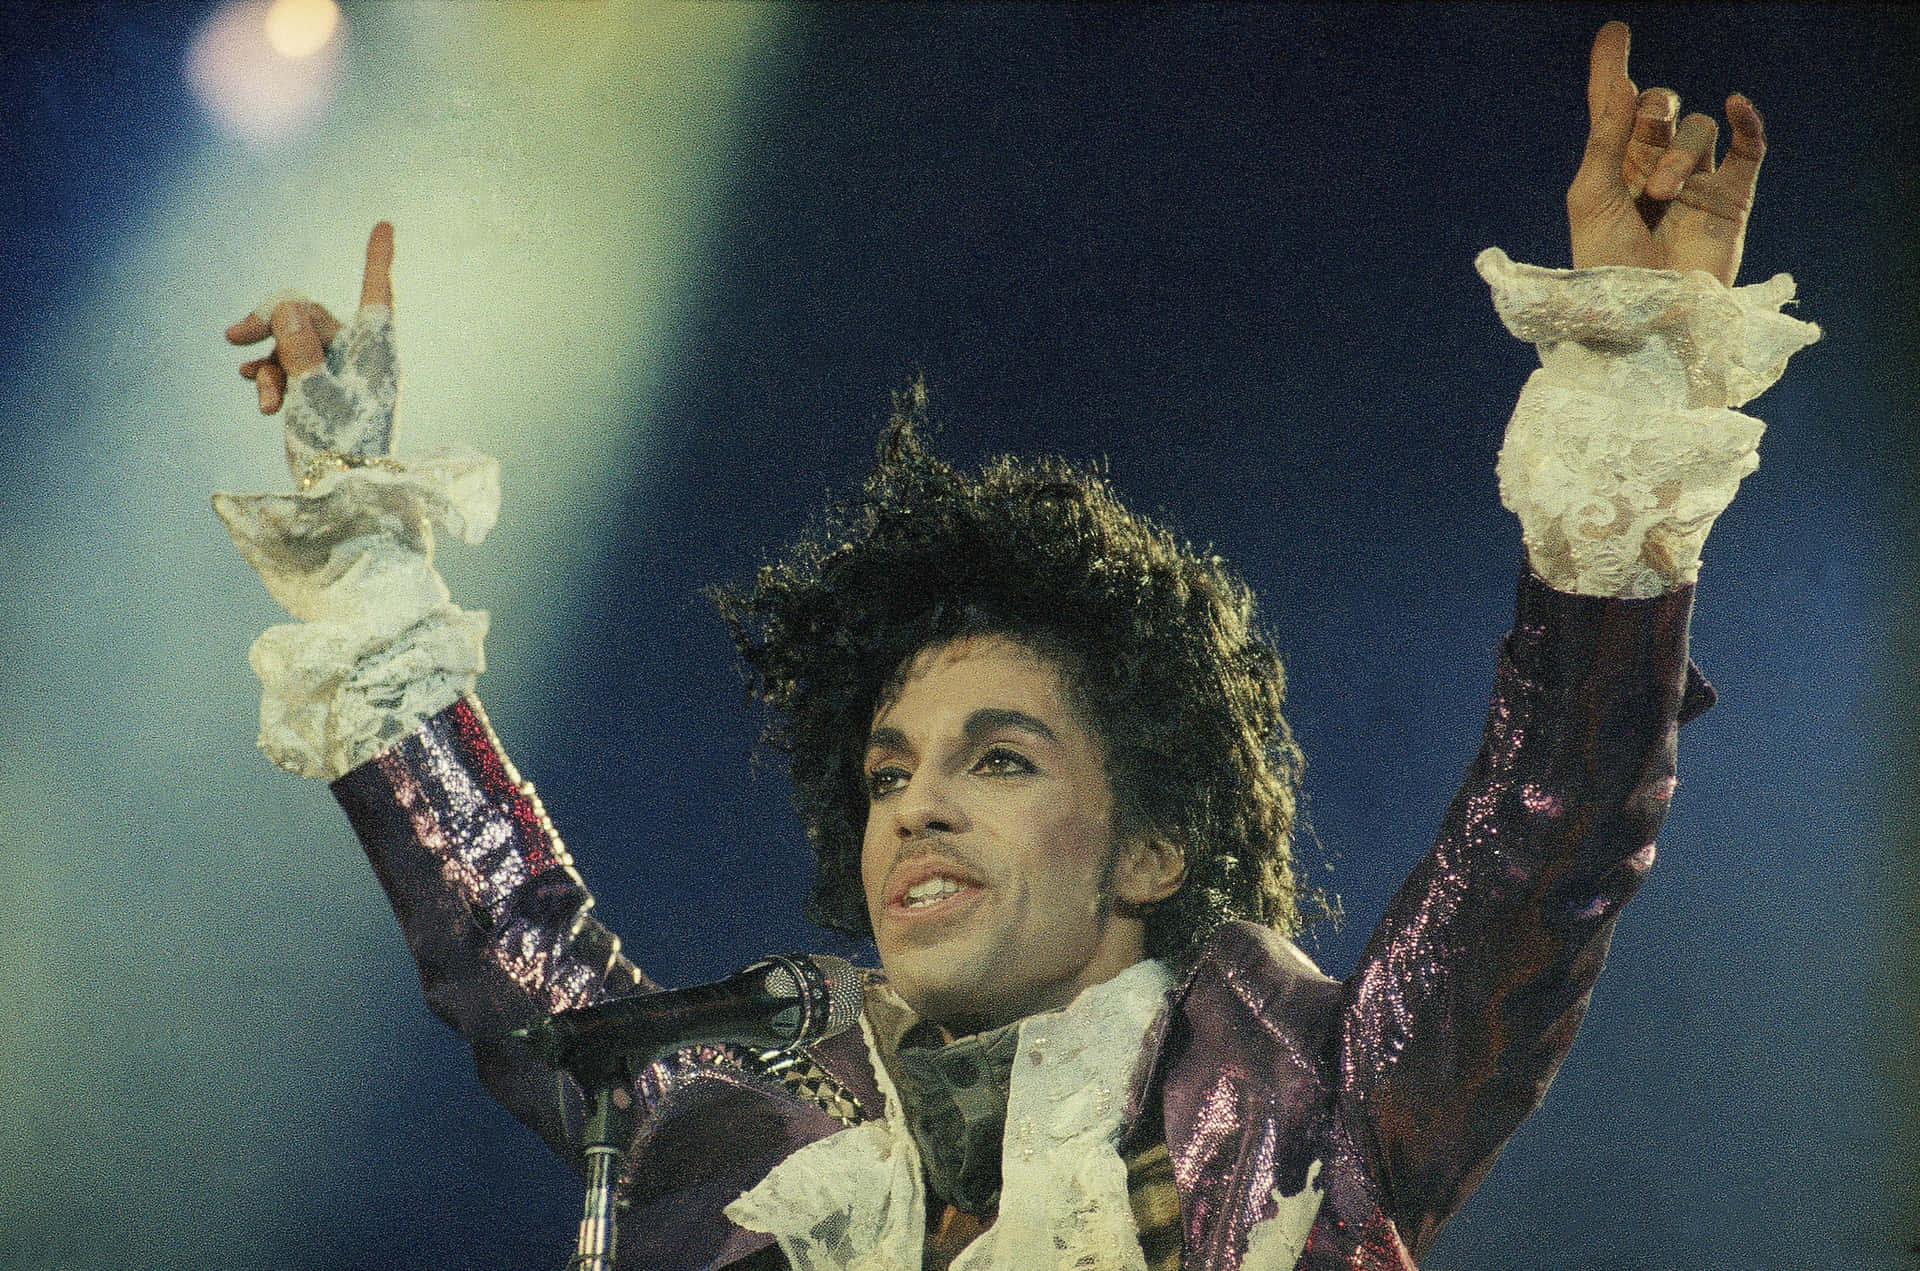 Prince—the musical icon who will forever leave an impression